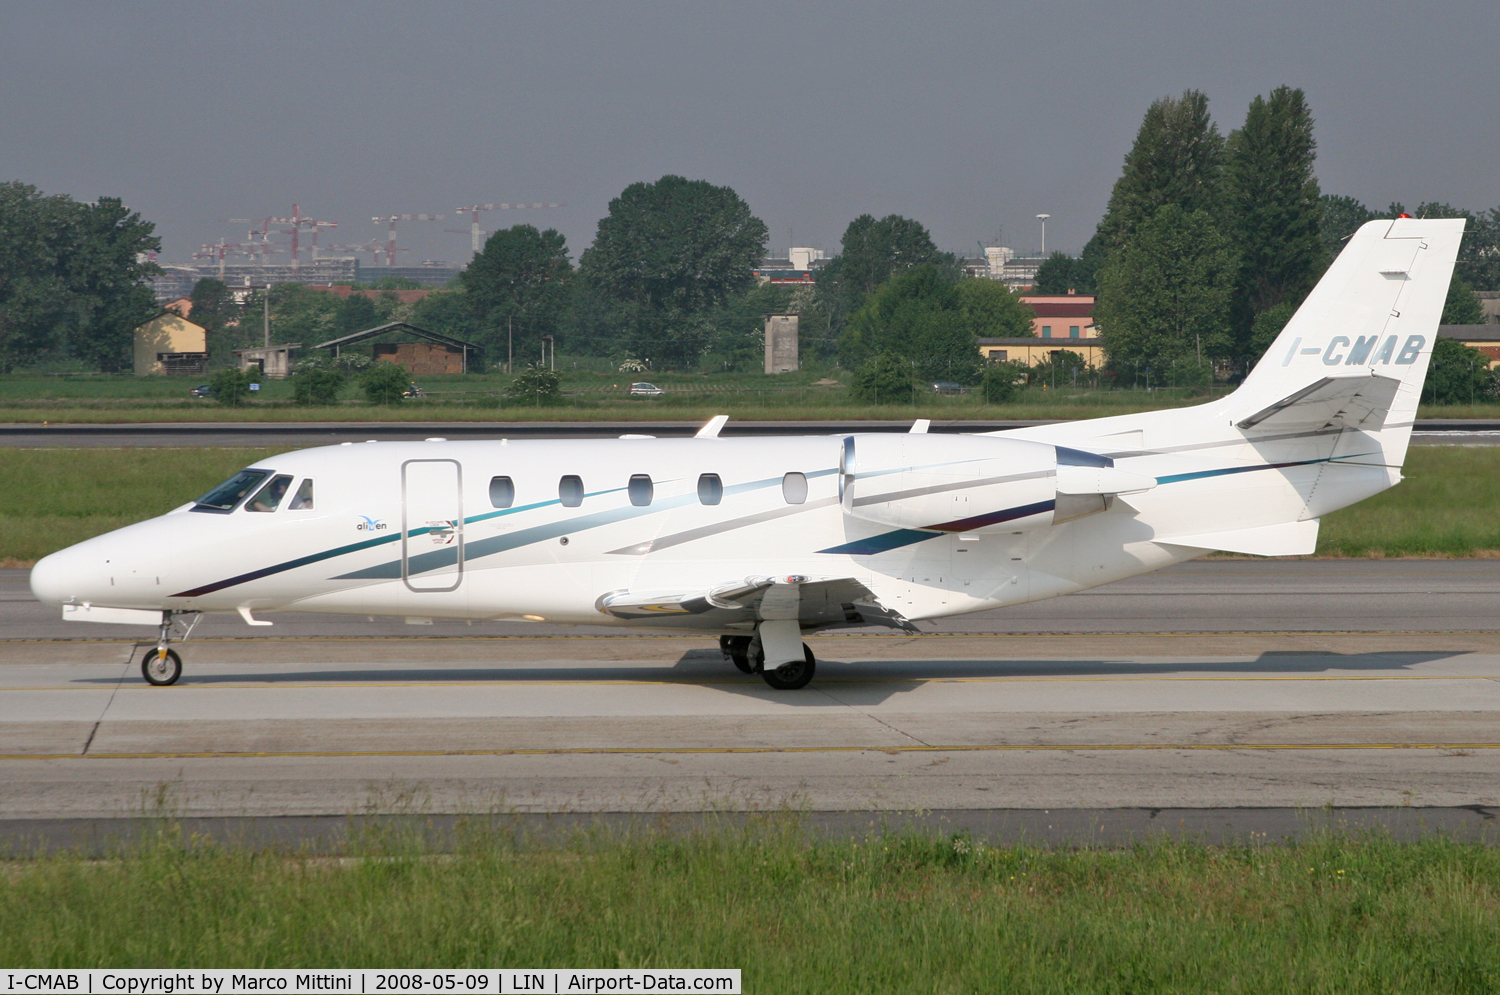 I-CMAB, 2007 Cessna 560 Citation XLS C/N 560-5731, Operated by ALIVEN